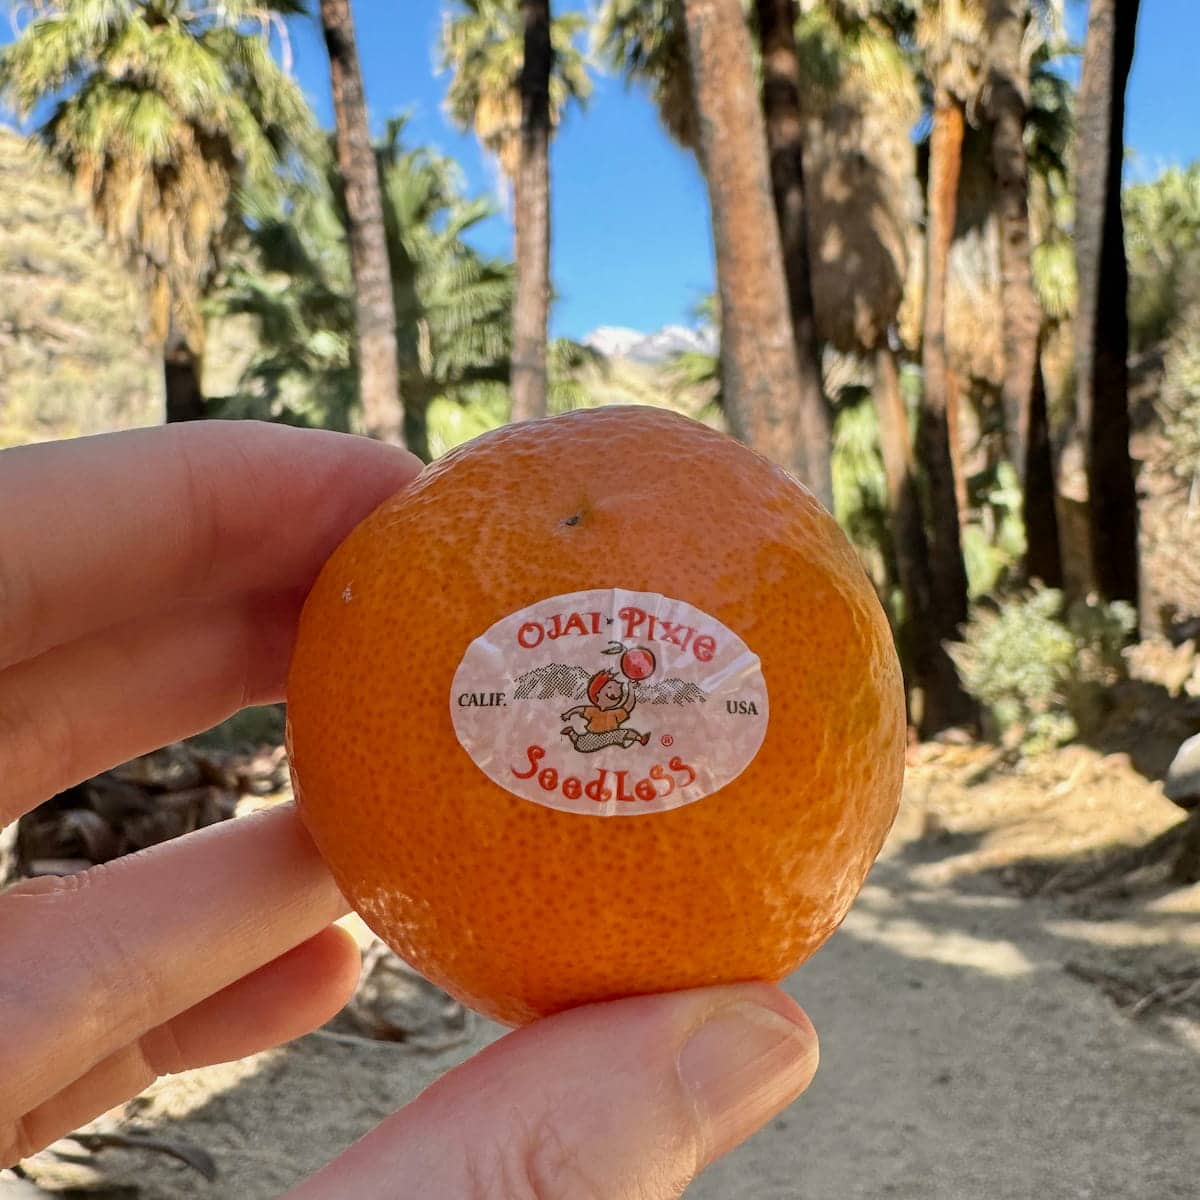 holding a Pixie tangerine in the Palm Oasis in California